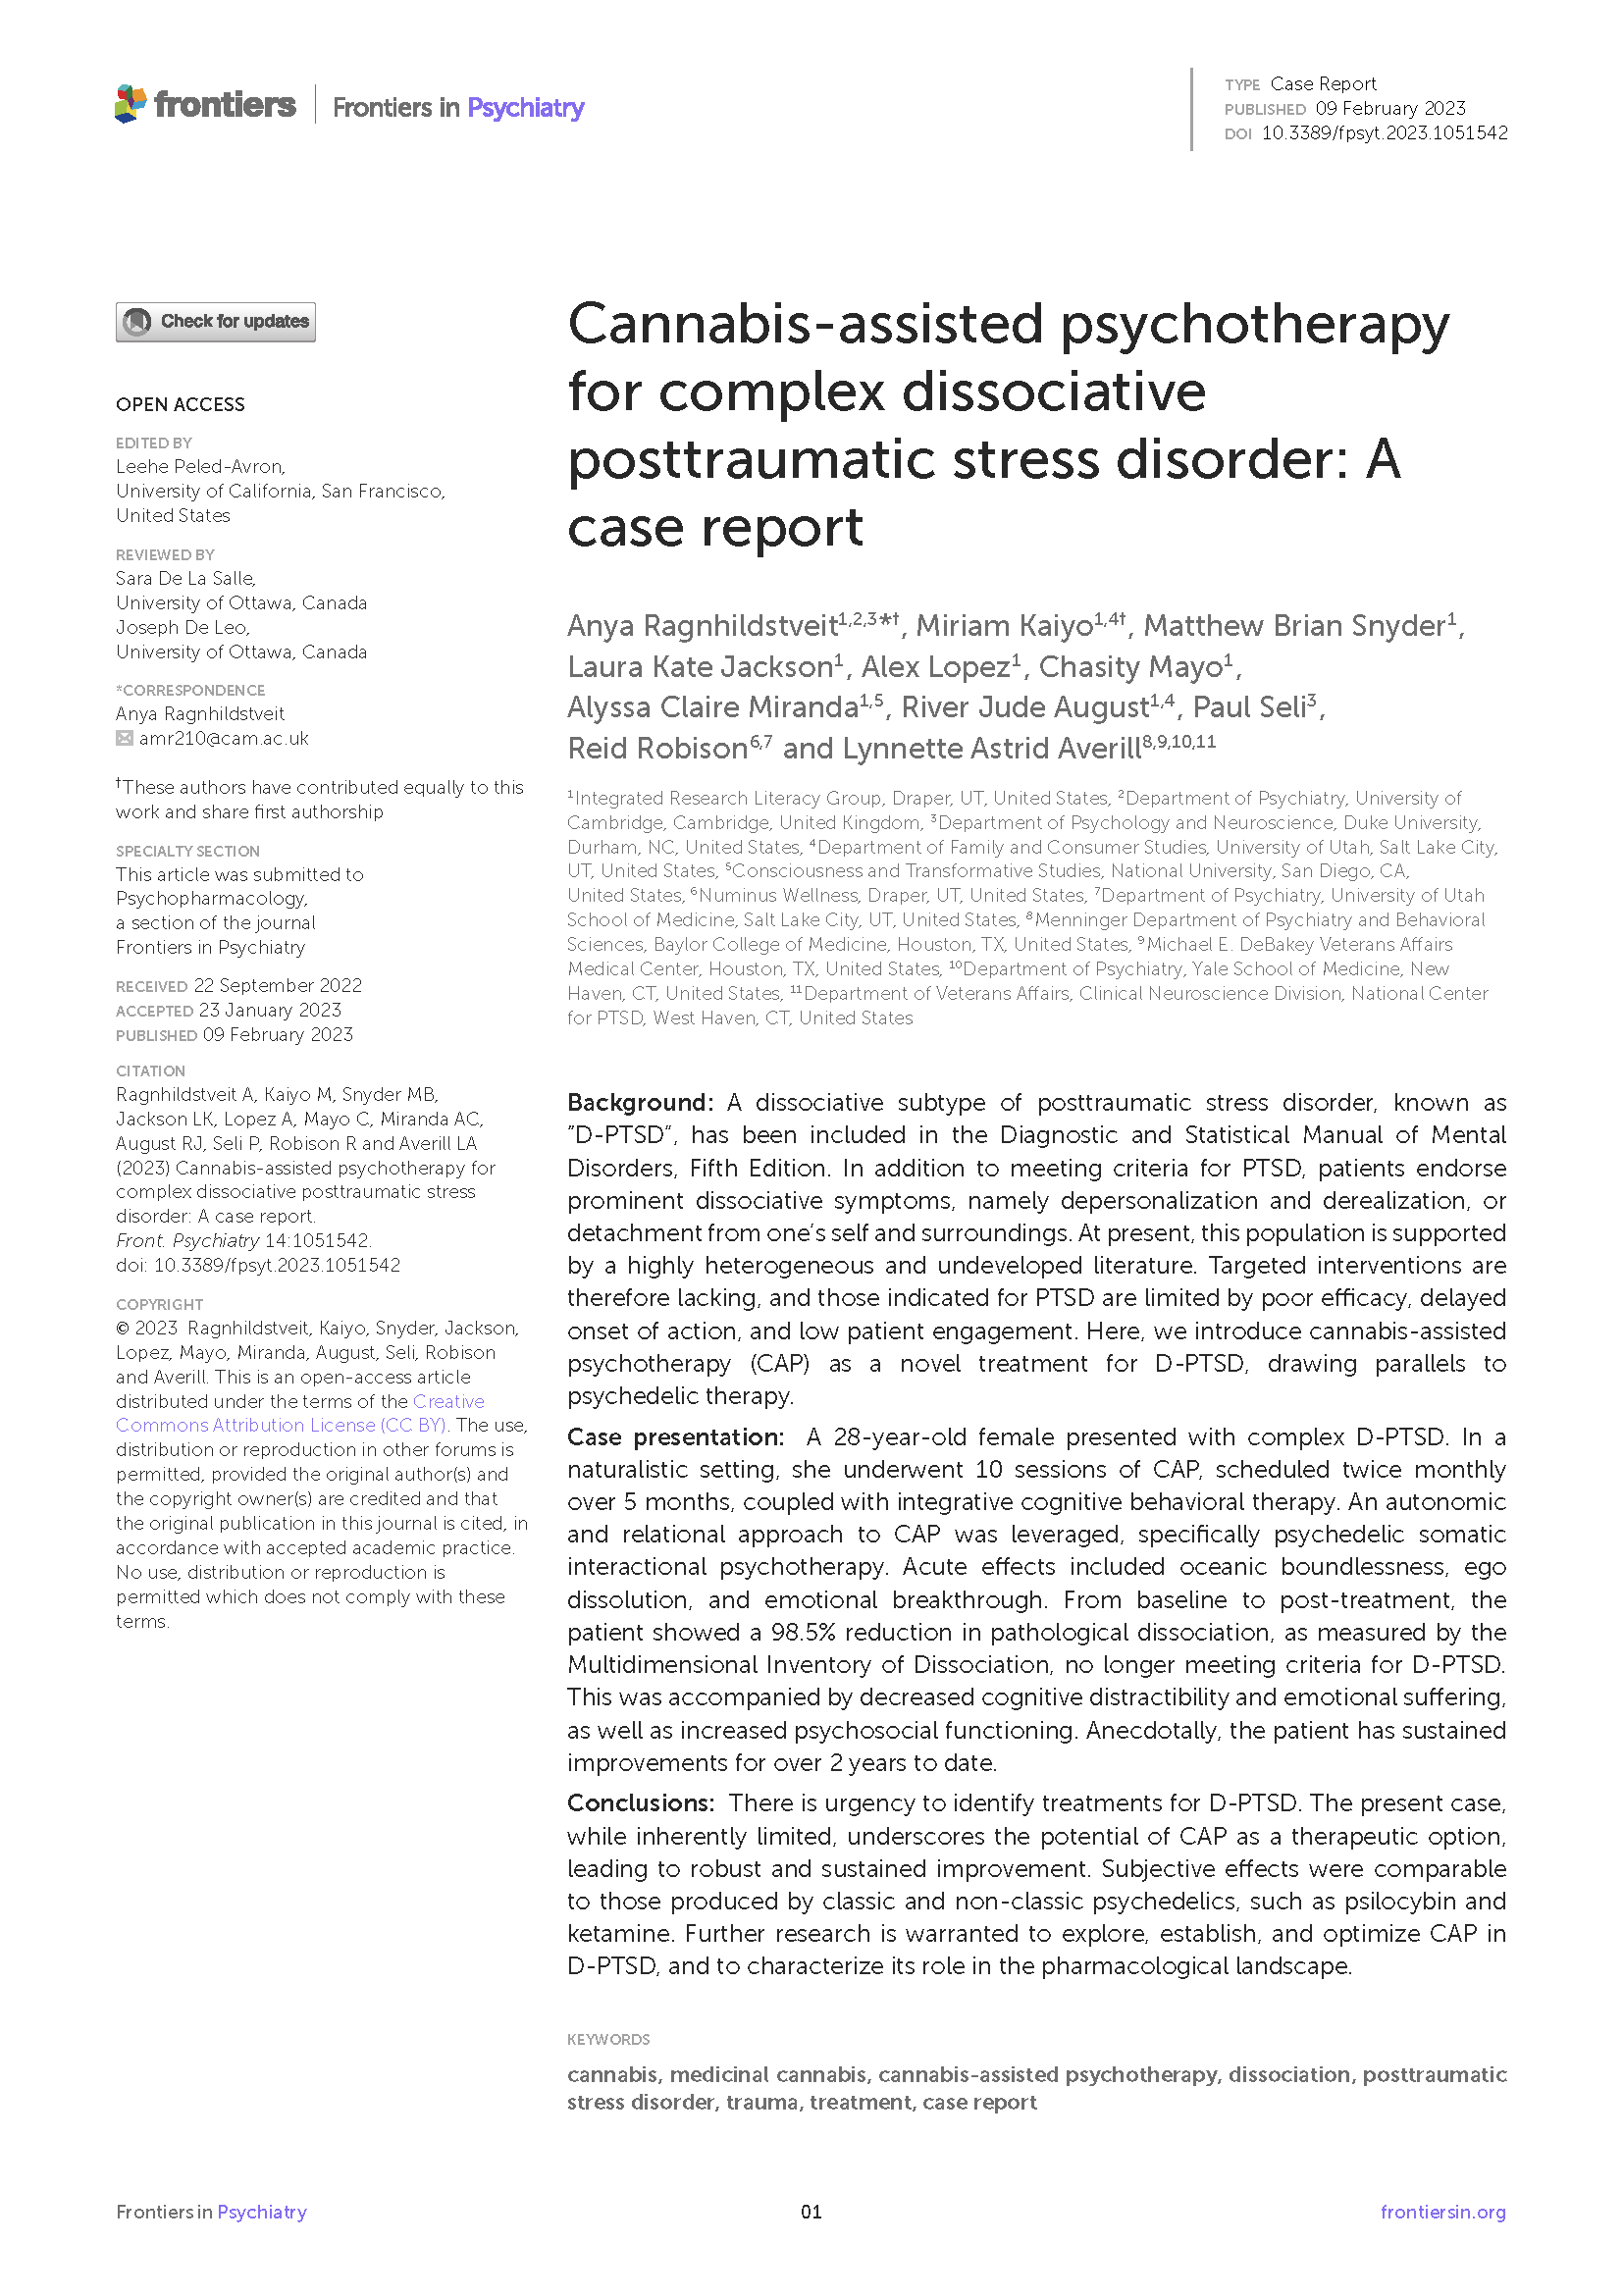 Cannabis-assisted psychotherapy for complex dissociative PTSD - A case report_Page_1.png